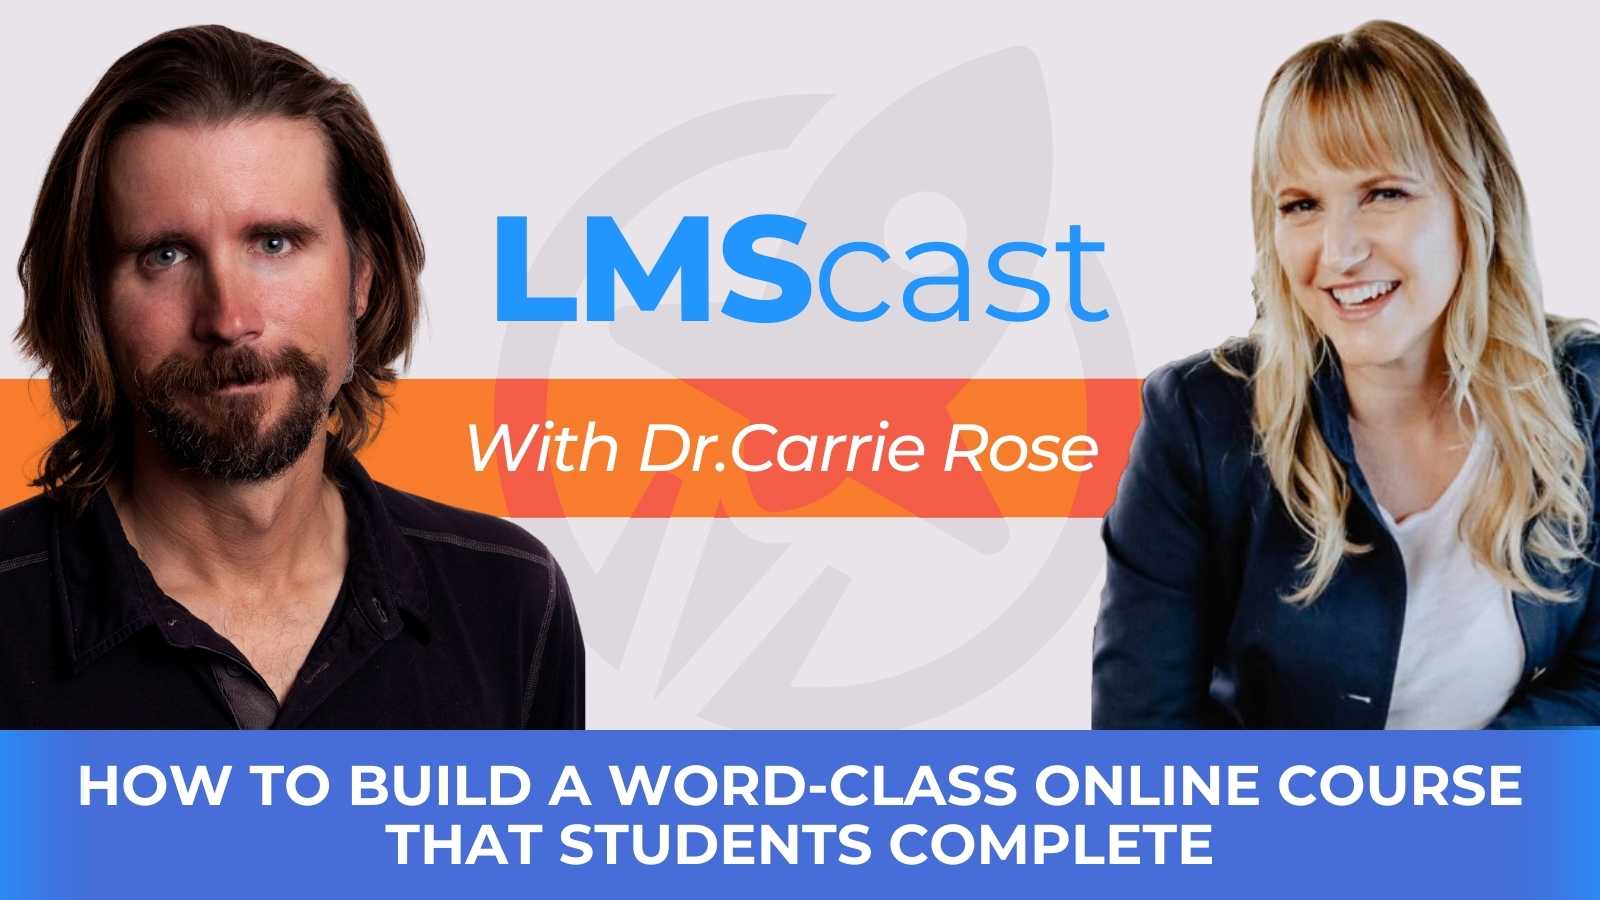 How to Build a Word-Class Online Course that Students Complete with Dr. Carrie Rose